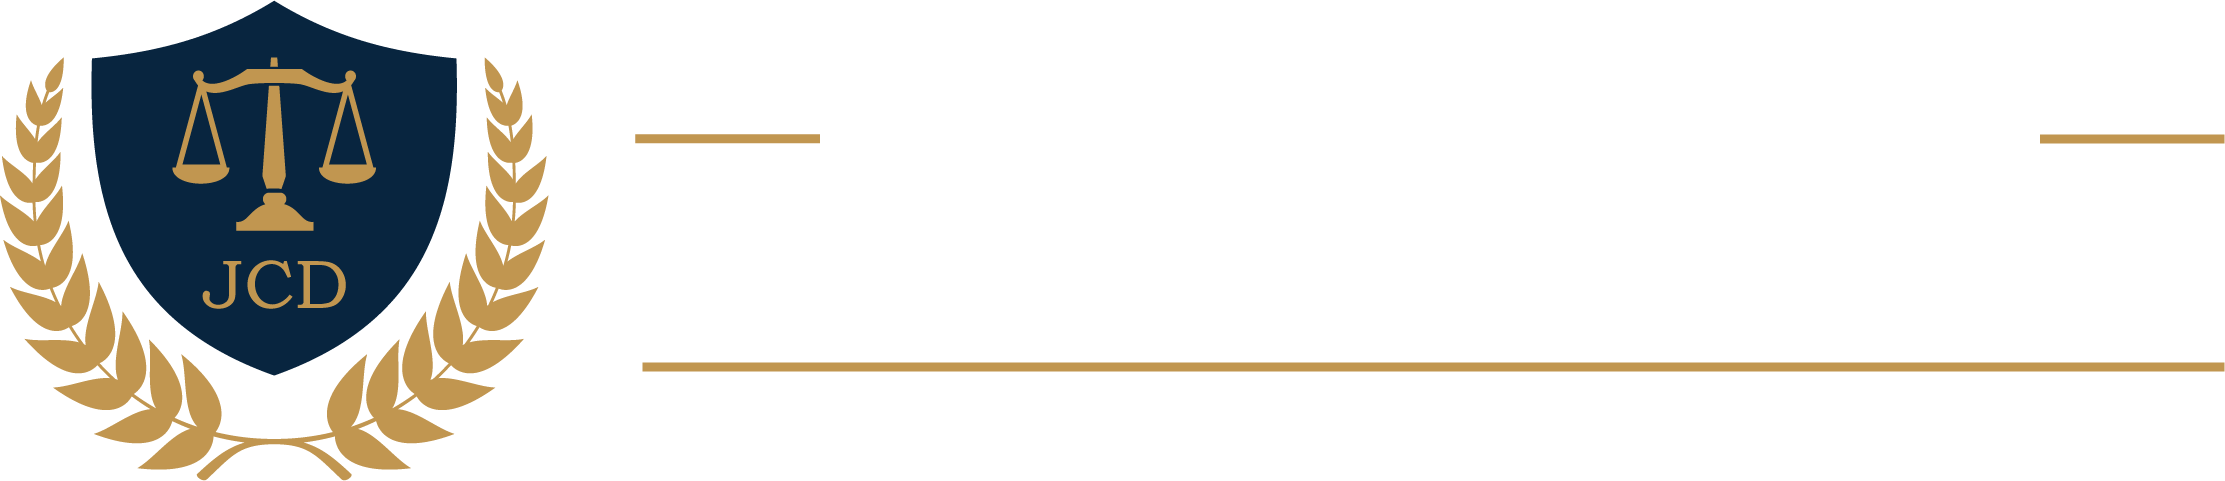 The Law Offices Of James C. DeZao